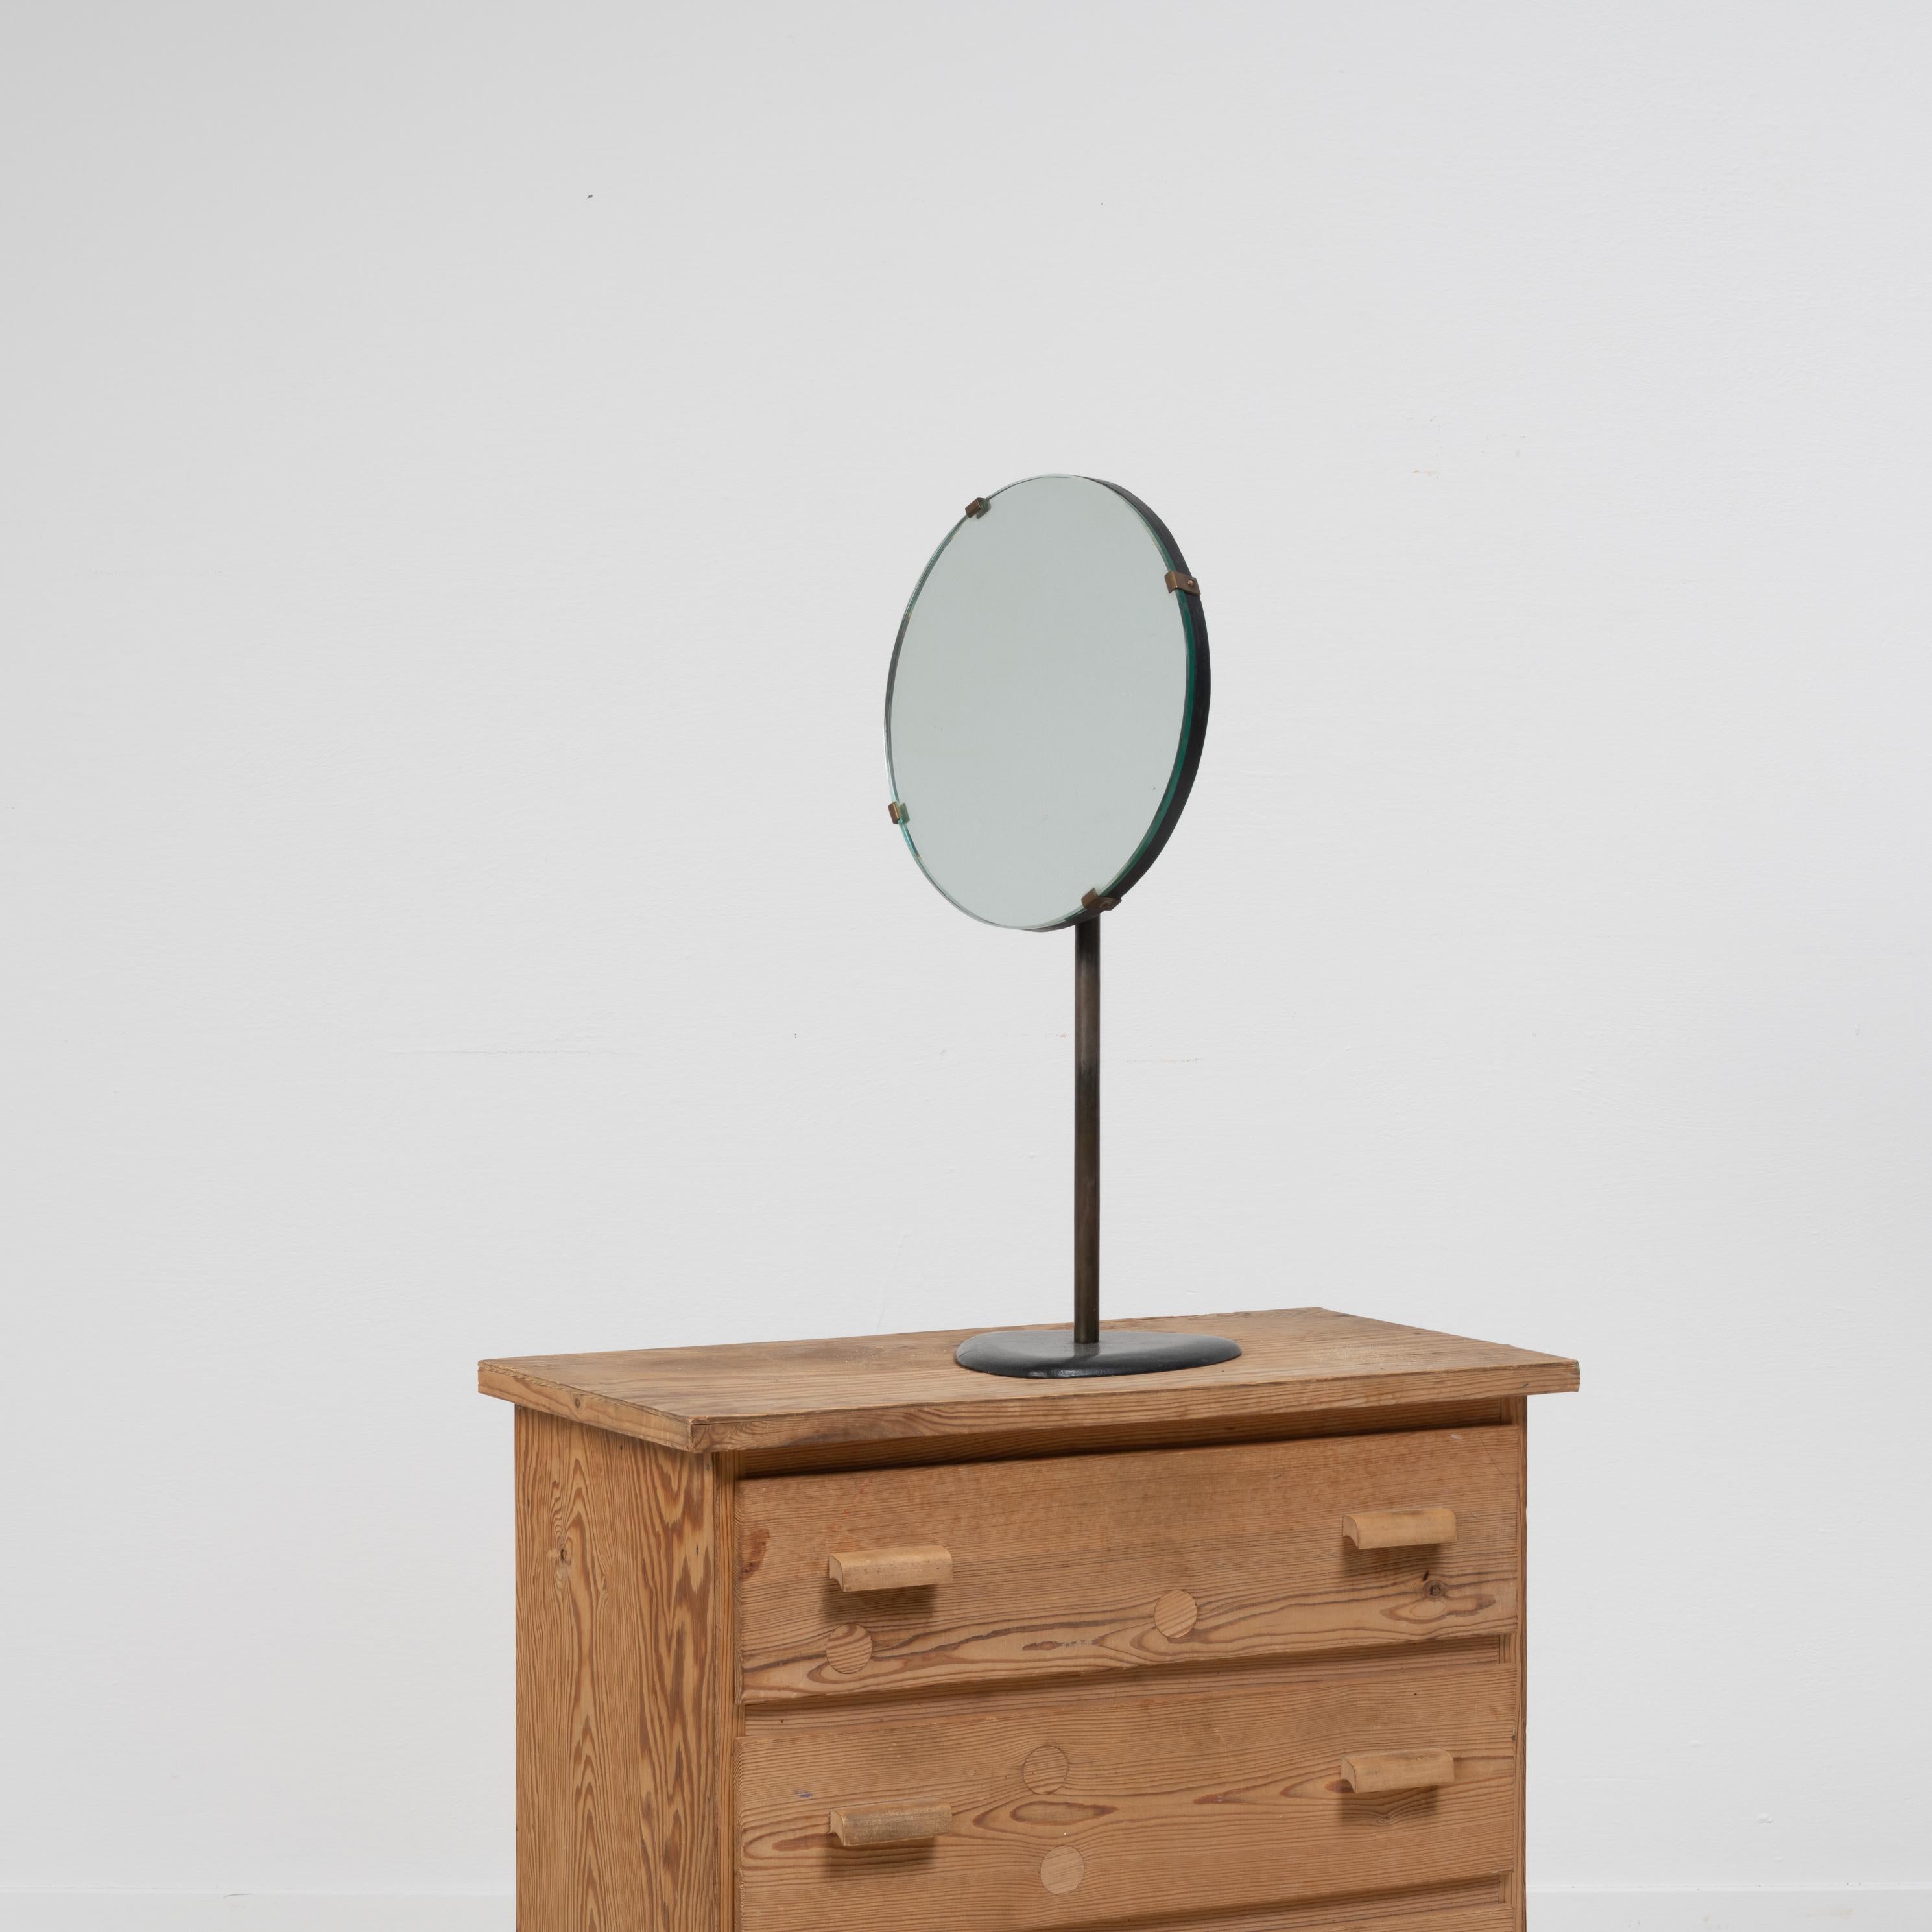 Swedish Art Deco table mirror from the 1930s. The mirror is clean and simple with a timeless and classic design that fits every style. The mirror is on the smaller side and a good size to fit on for example a hallway or vanity table. The foot and